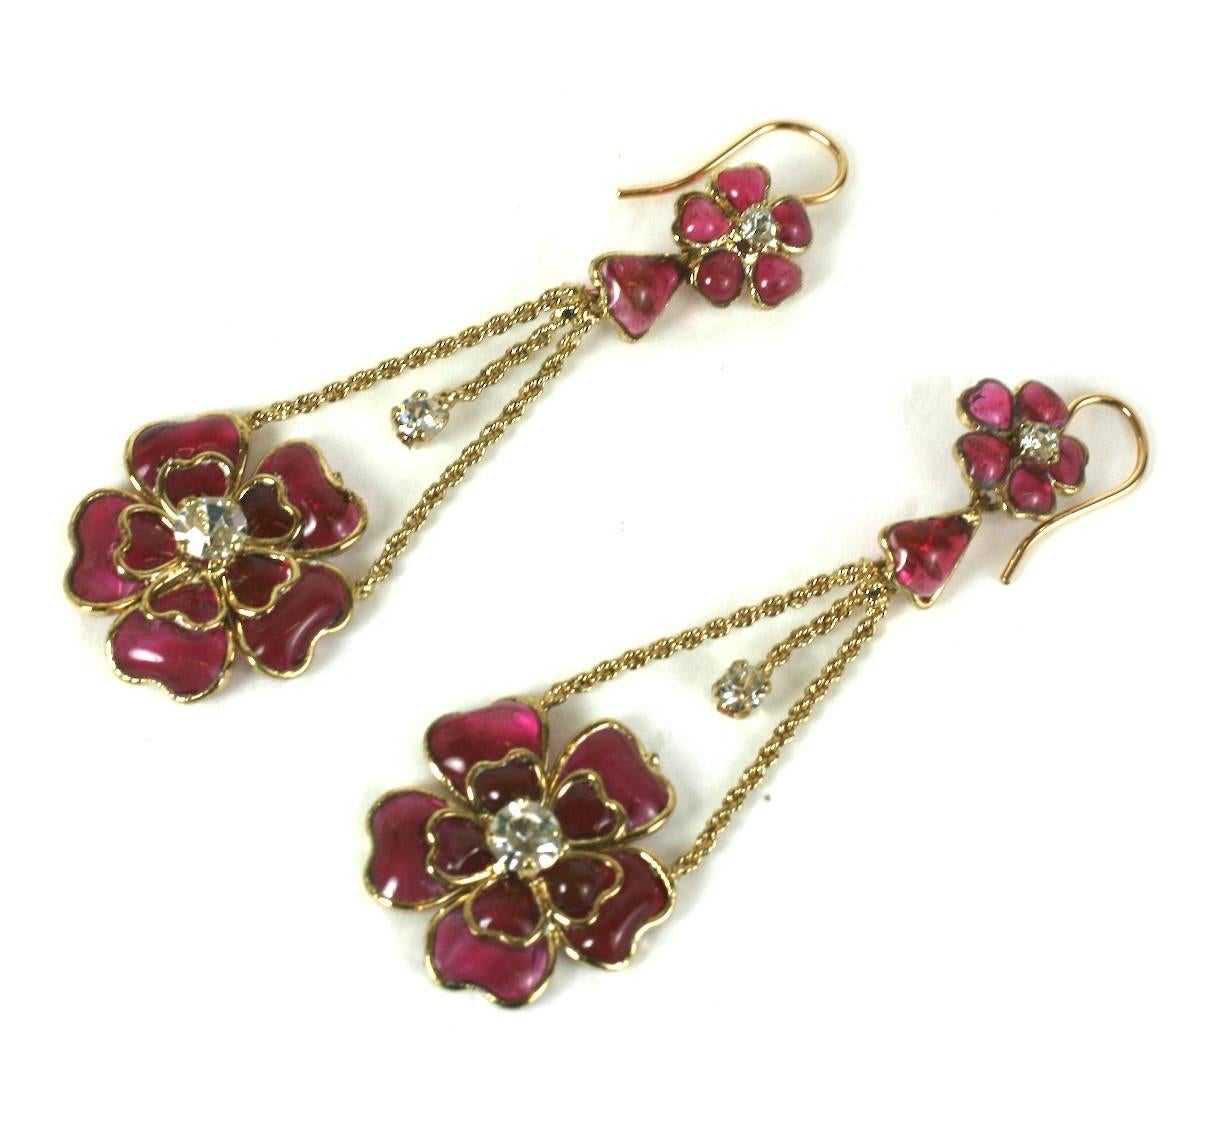 Napoleon III MWLC Second Empire Style Long Drop Earrings For Sale